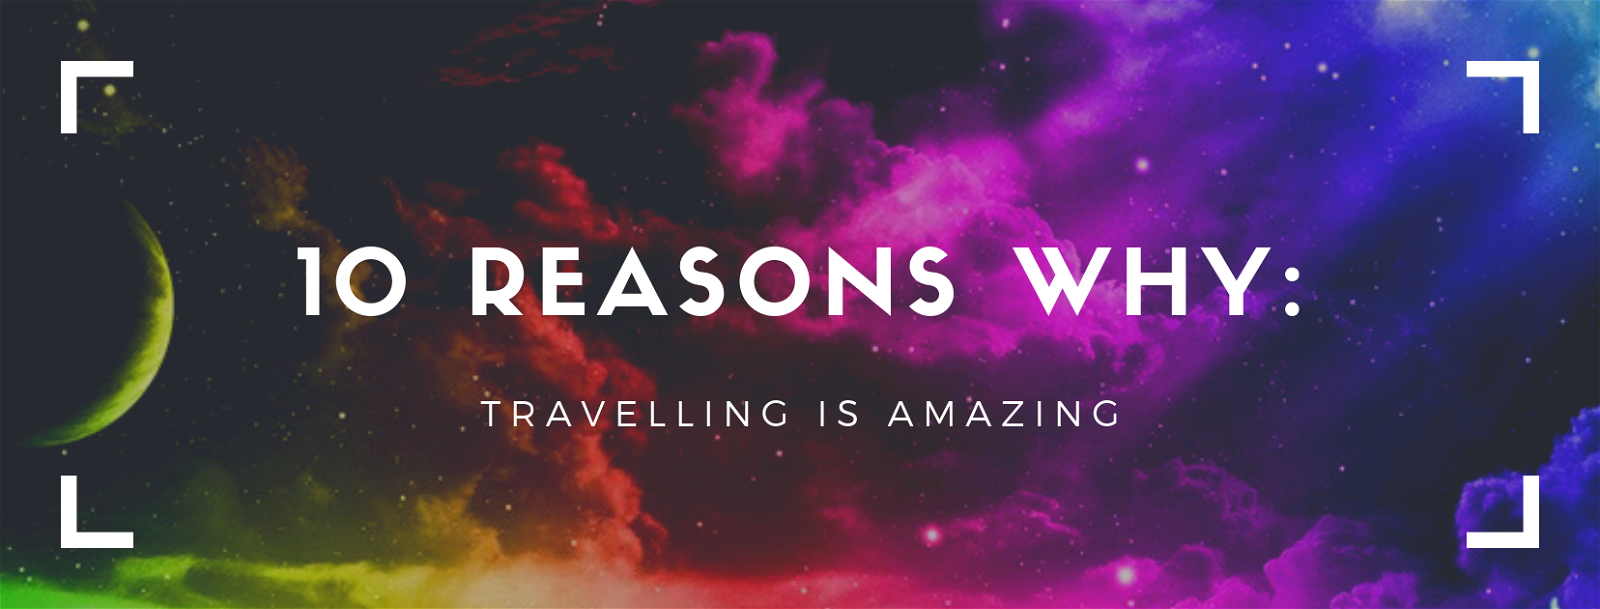 10 reasons Why: Travelling is amazing